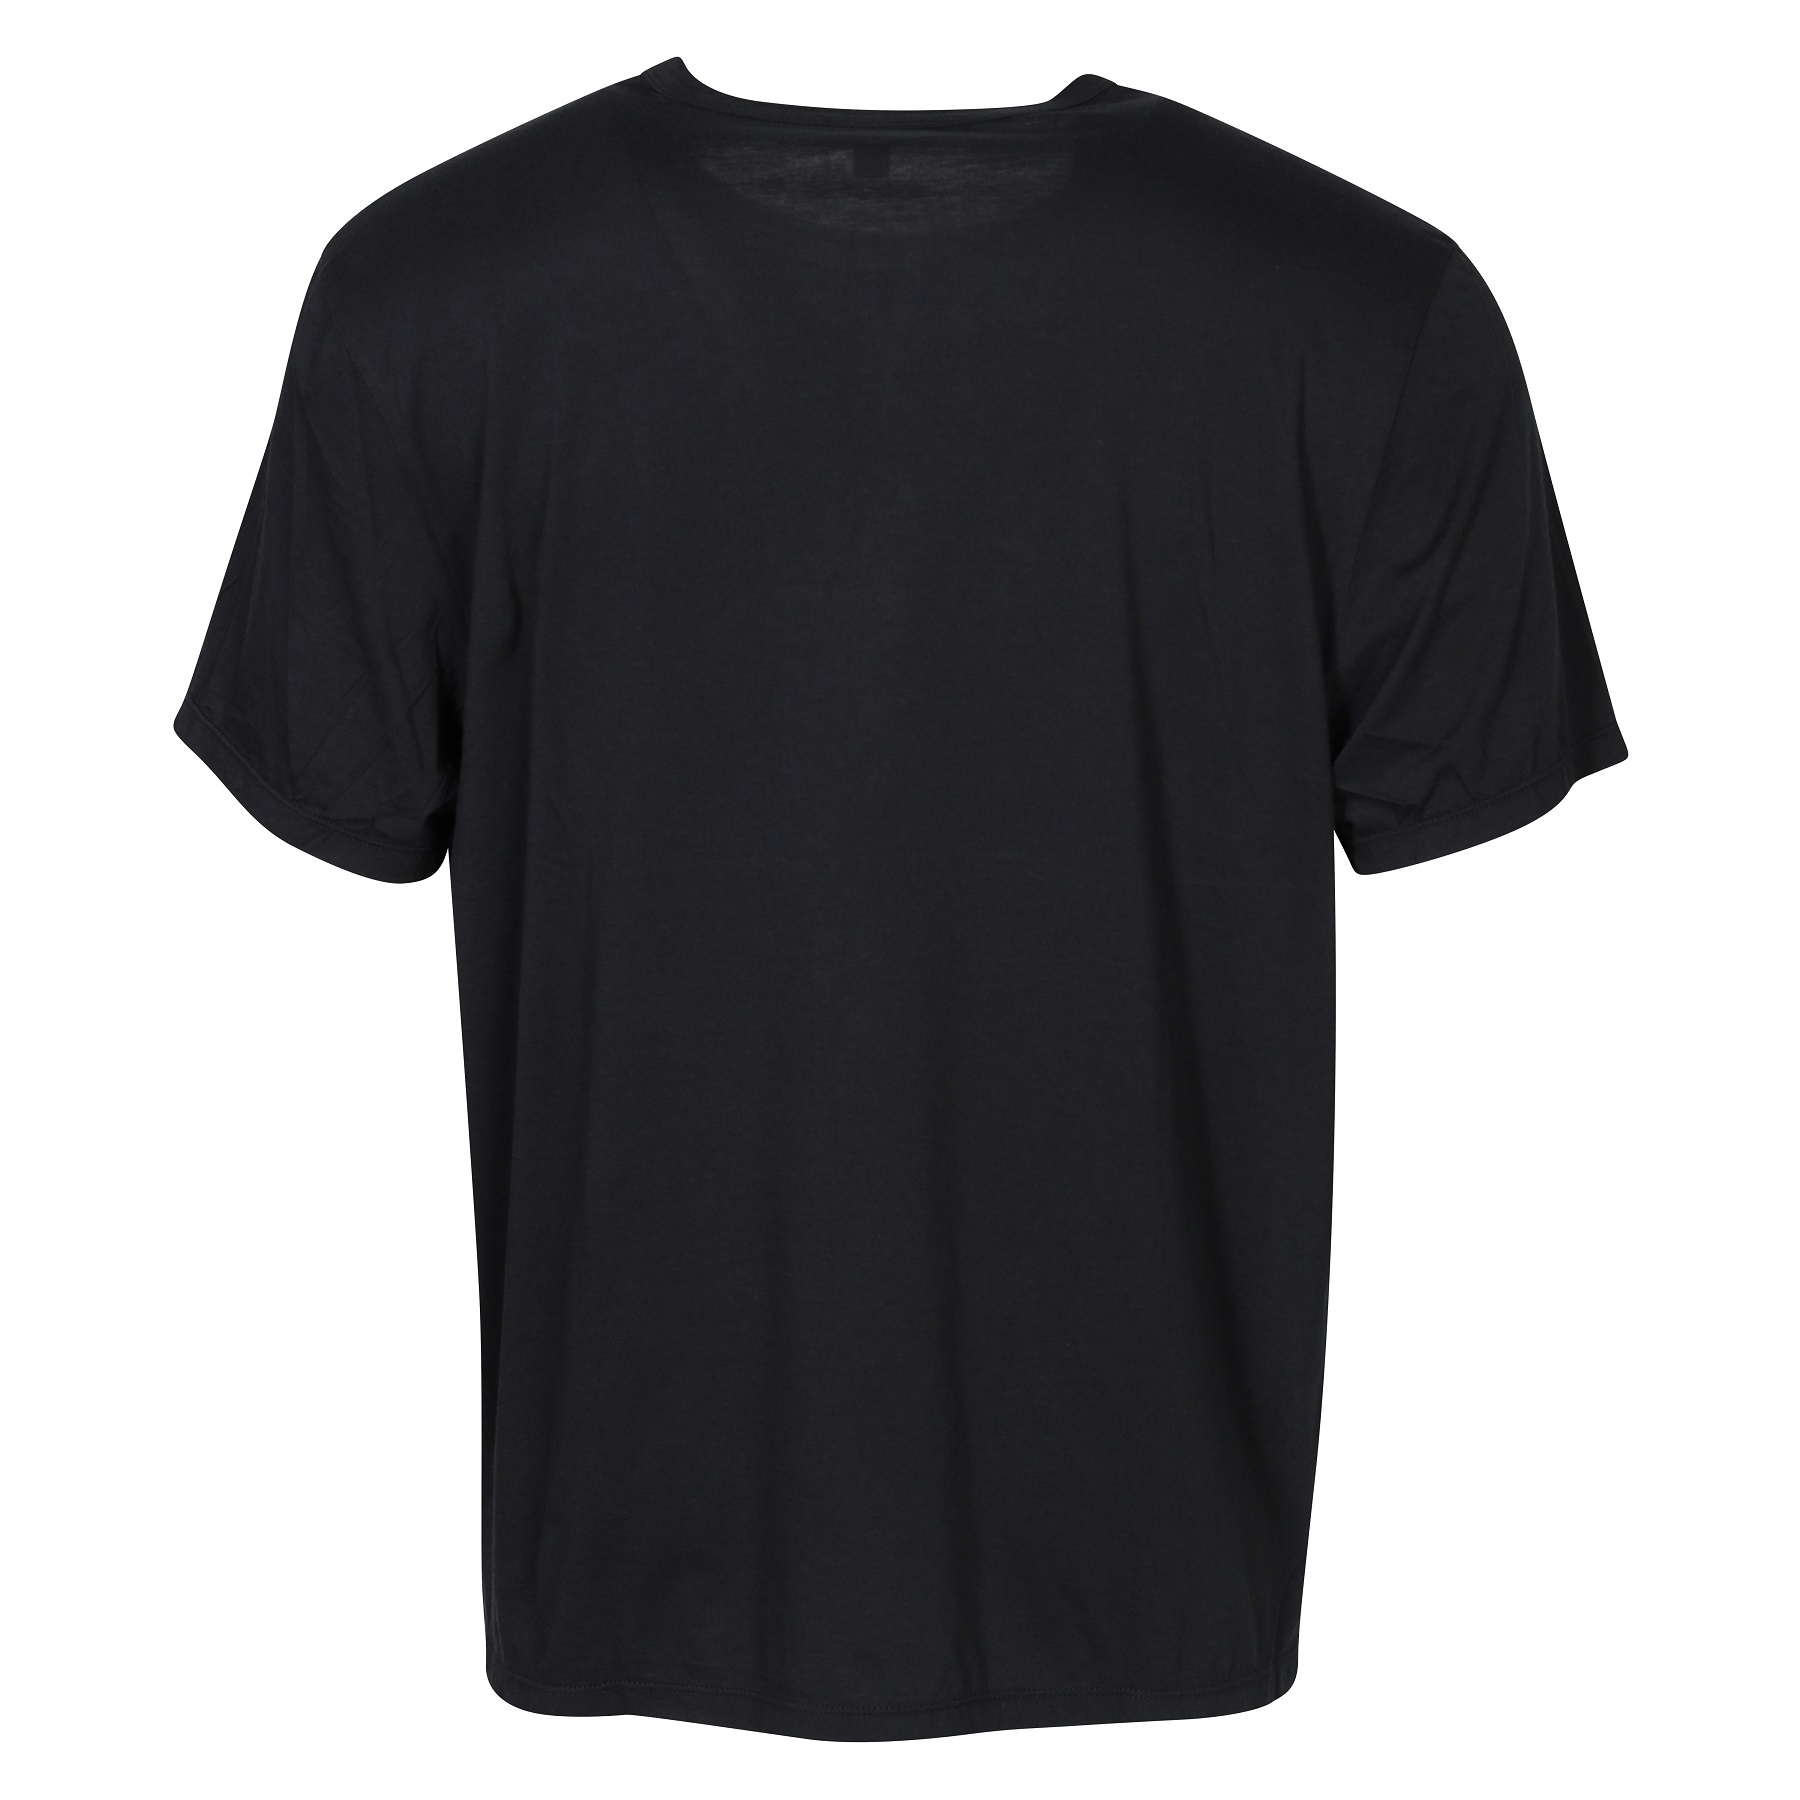 James Perse Elevated Lotus Jersey T-Shirt in Black